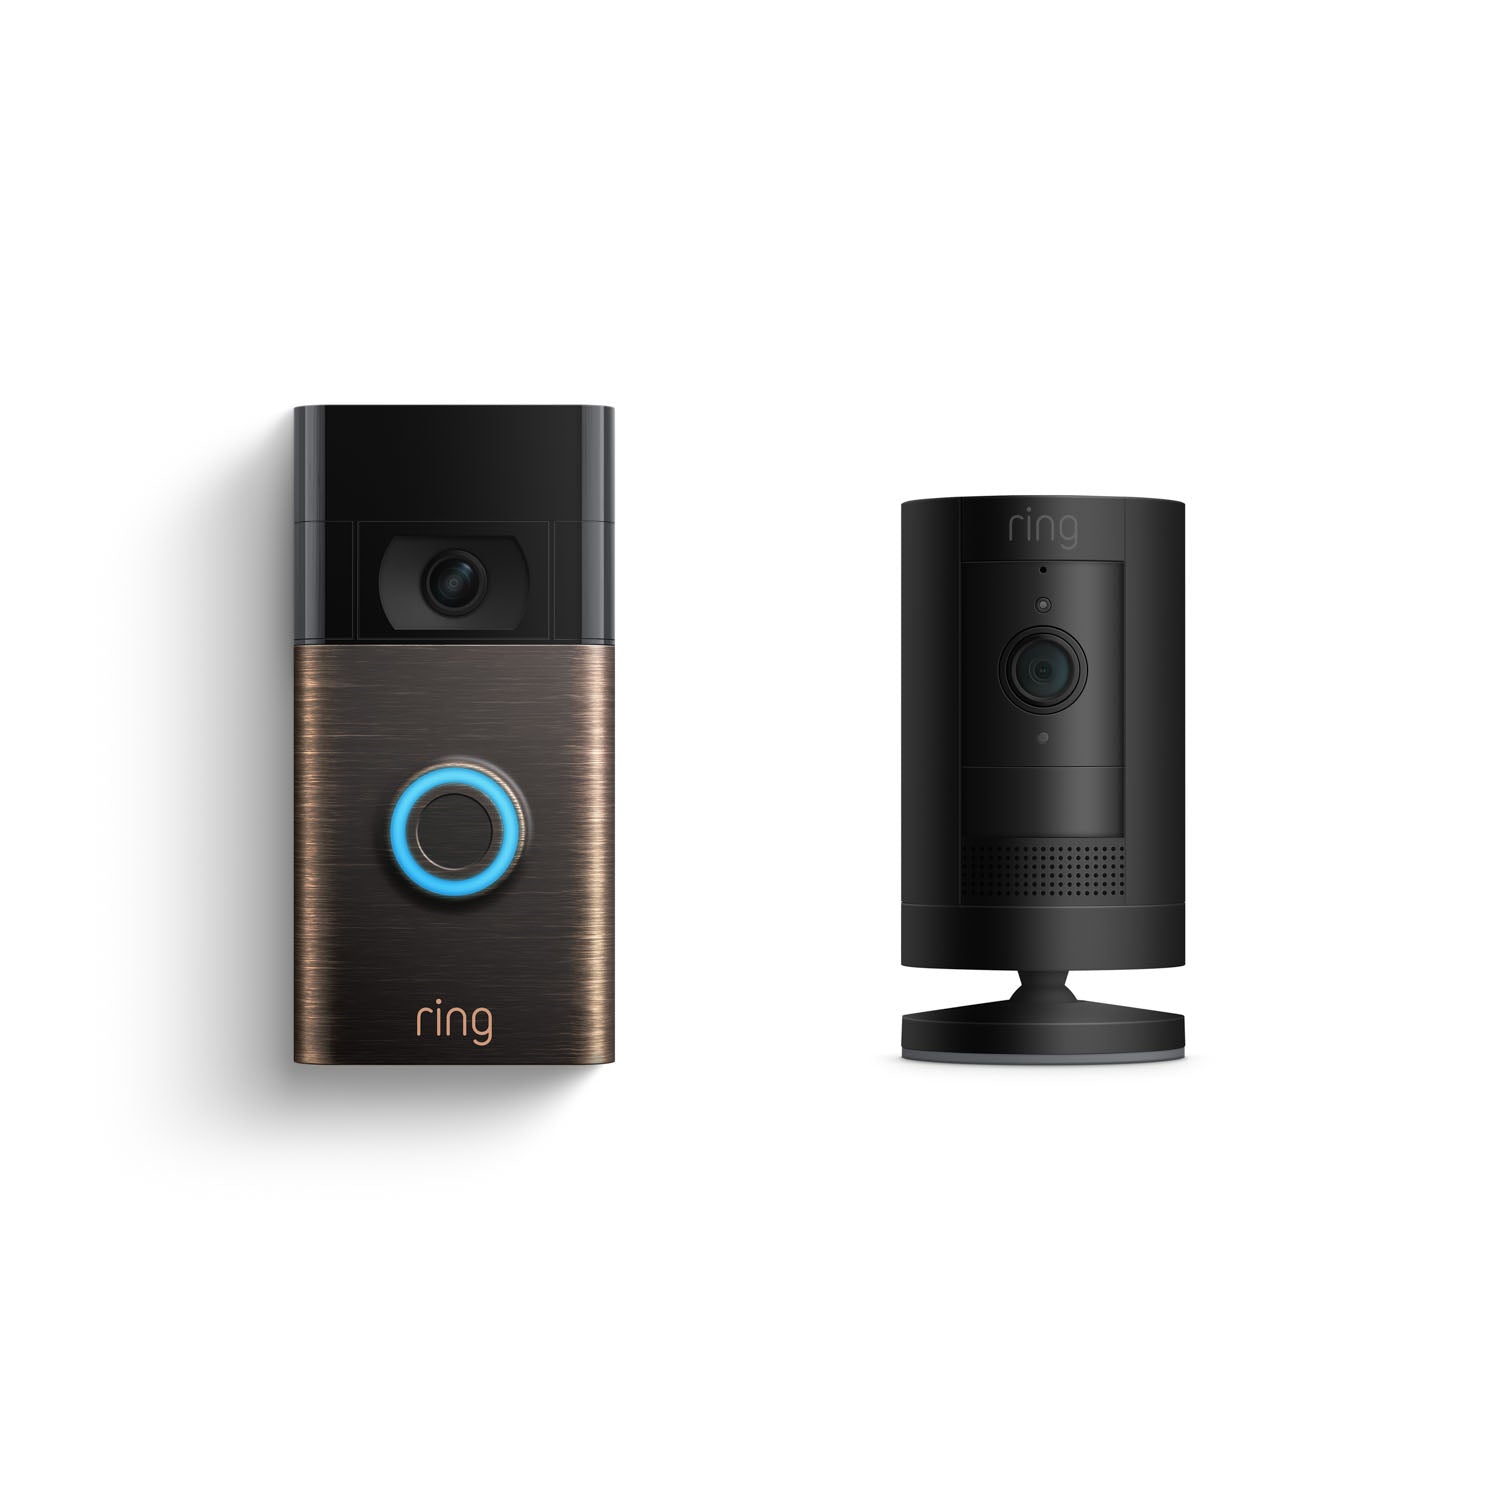 Connected Basic Kit (Video Doorbell (2nd Generation) + Stick Up Cam Battery) - Bronze + Black